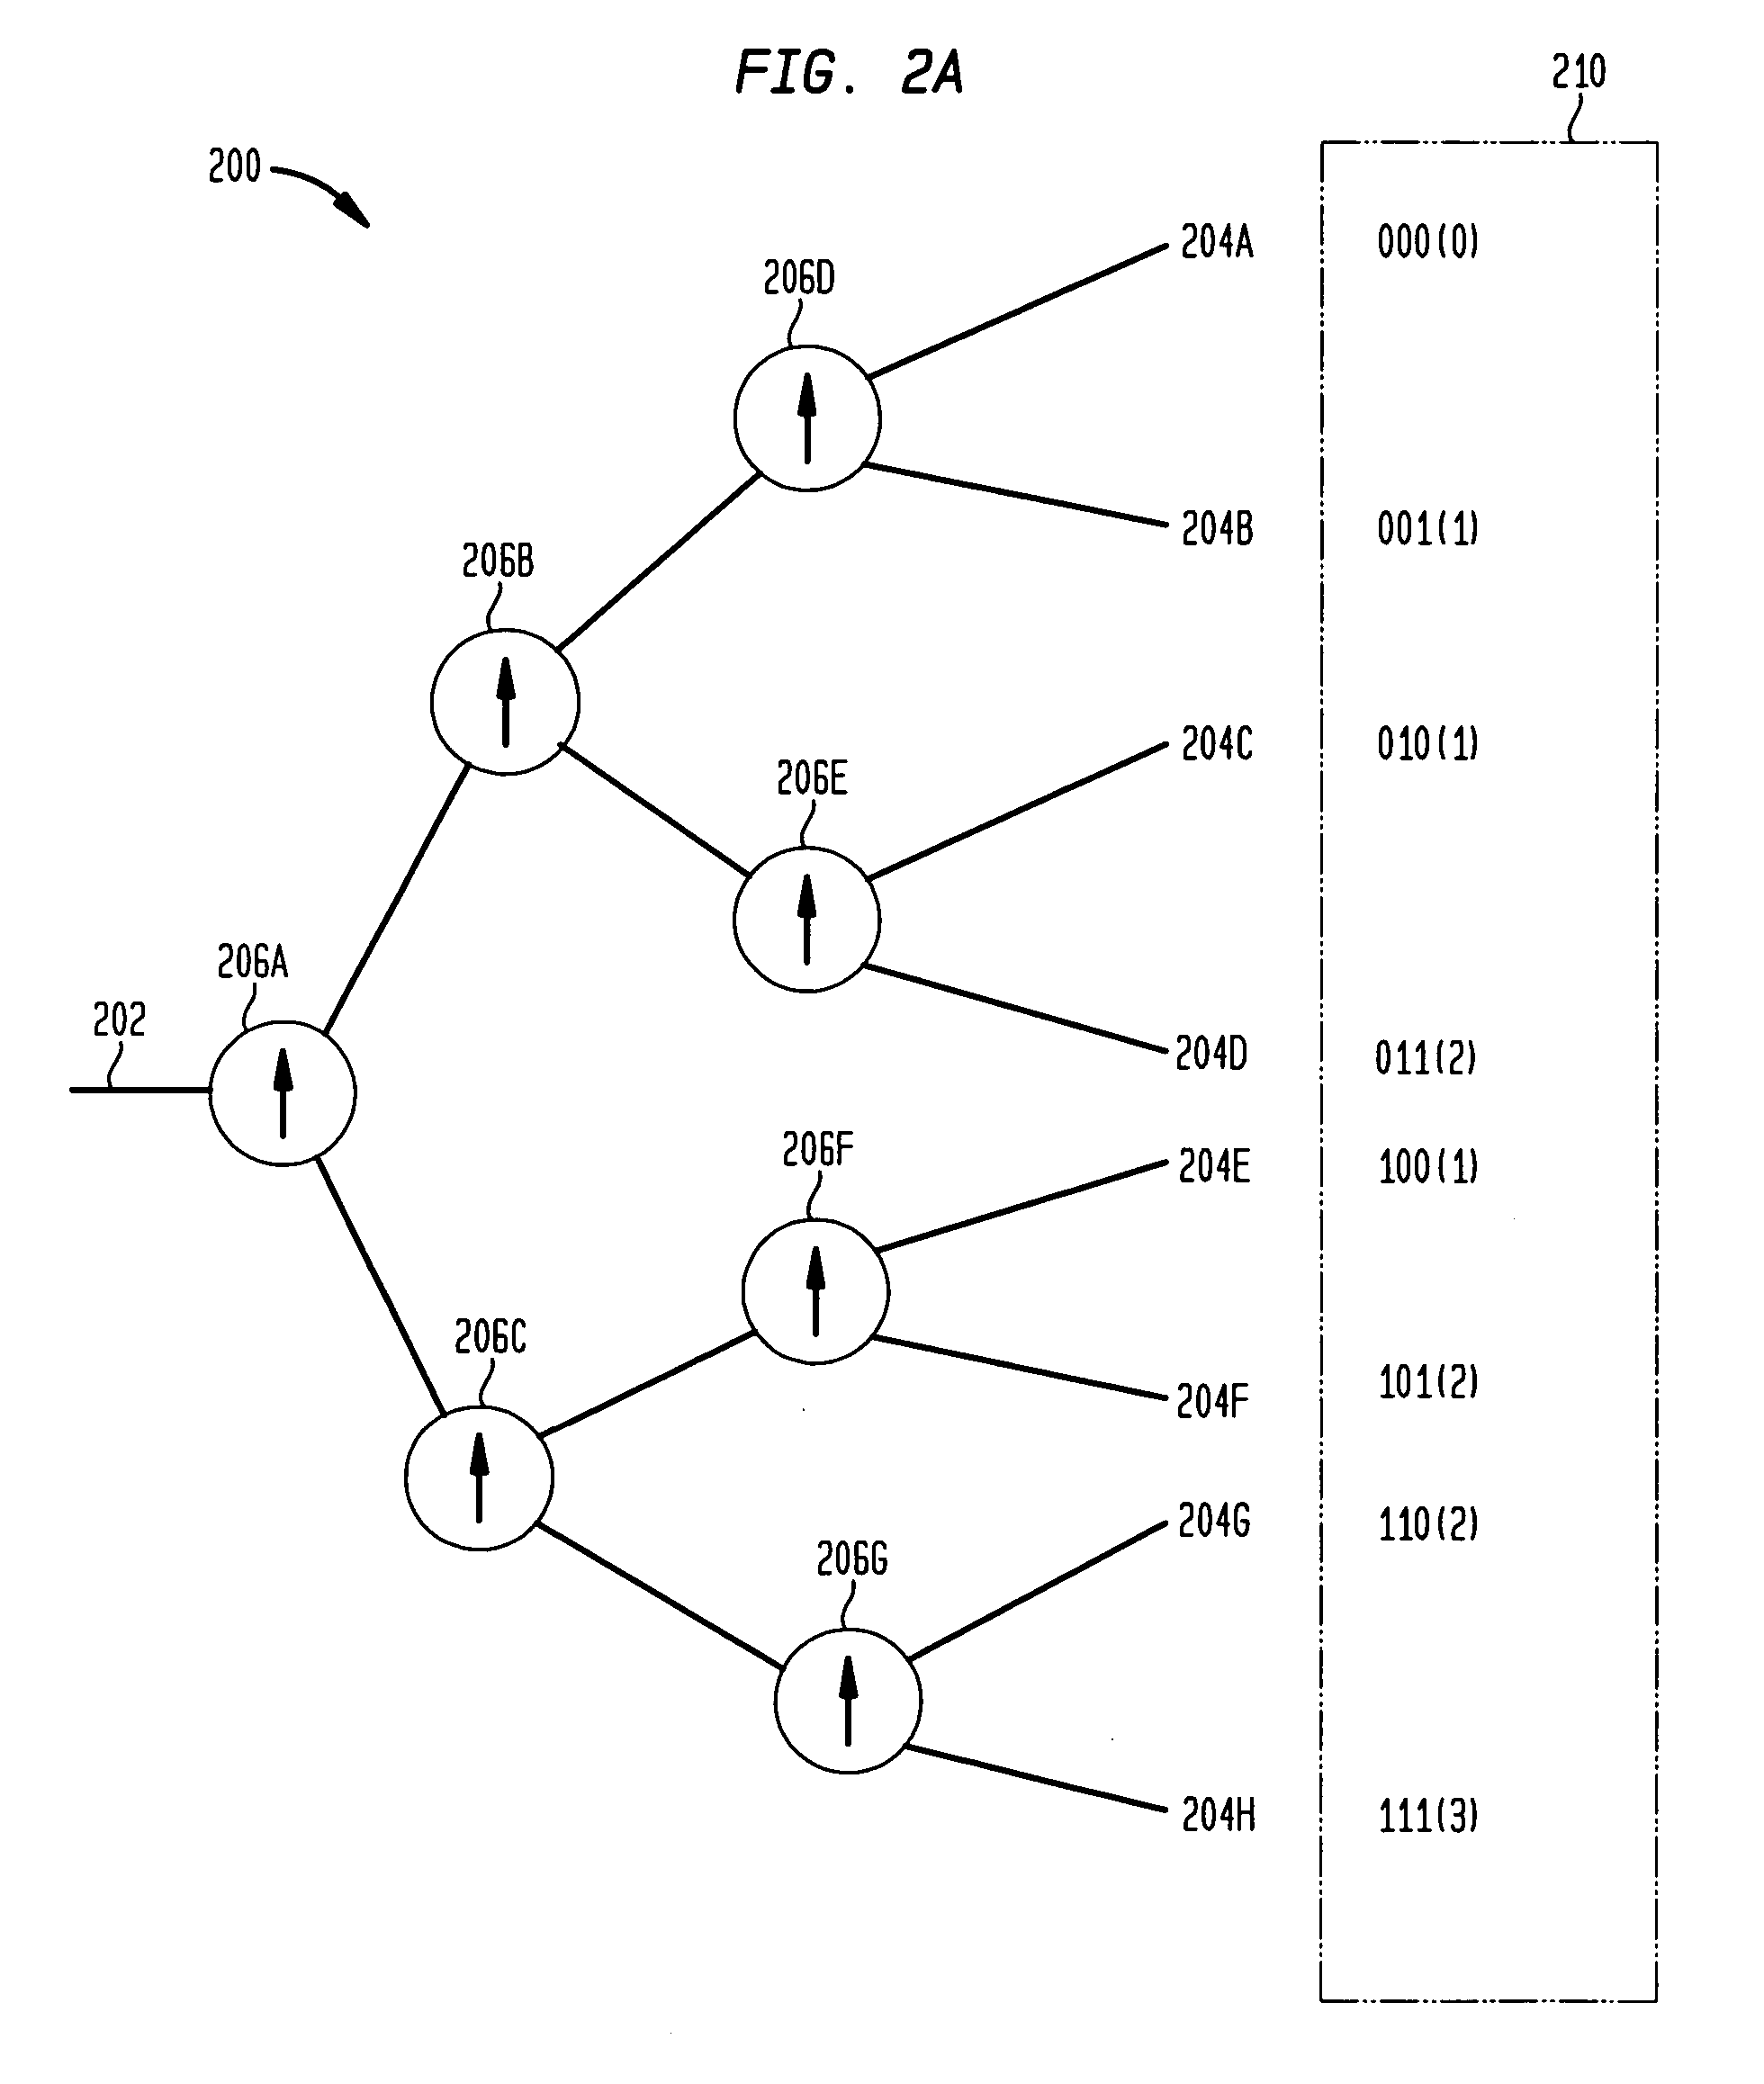 Methods and apparatus for constructing switch arrays for routing of optical signals so as to minimize power dissipation